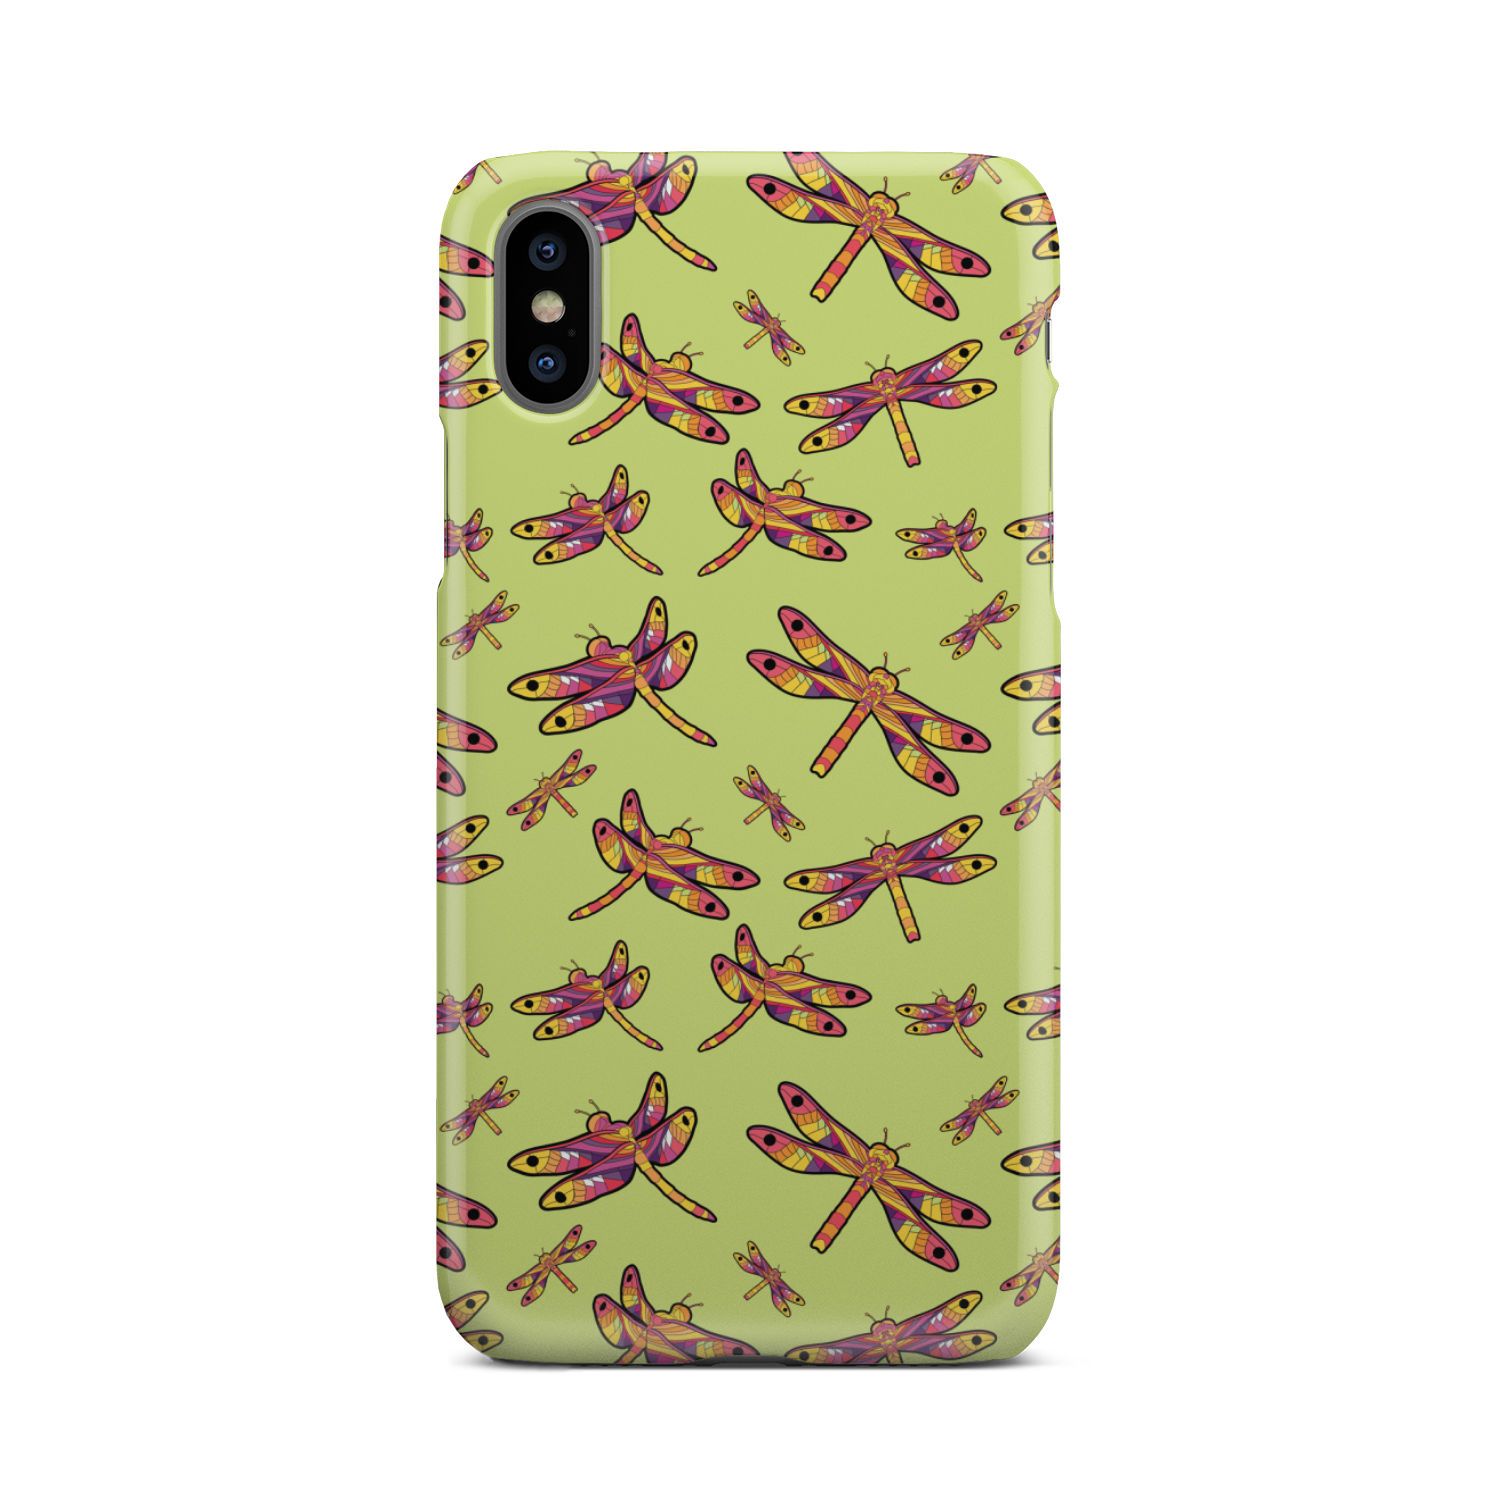 Gathering Lime Phone Case Phone Case wc-fulfillment iPhone Xs 